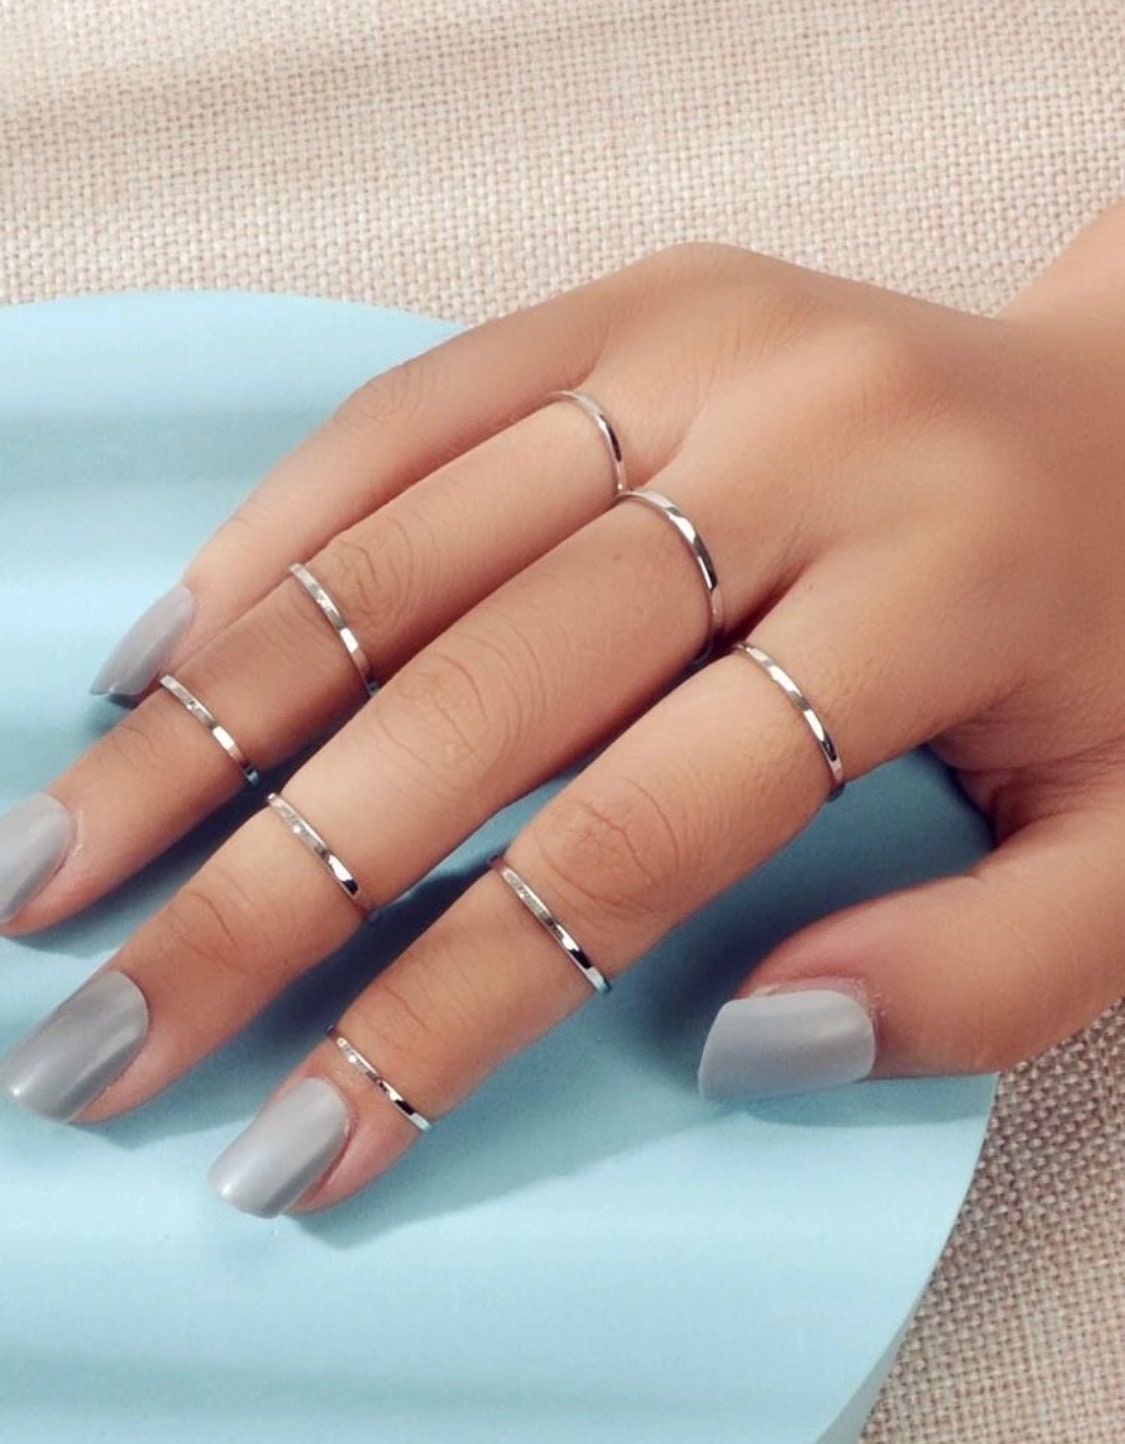 8 Piece Simple Silver Ring Set, Pretty Silver Rings, Classic